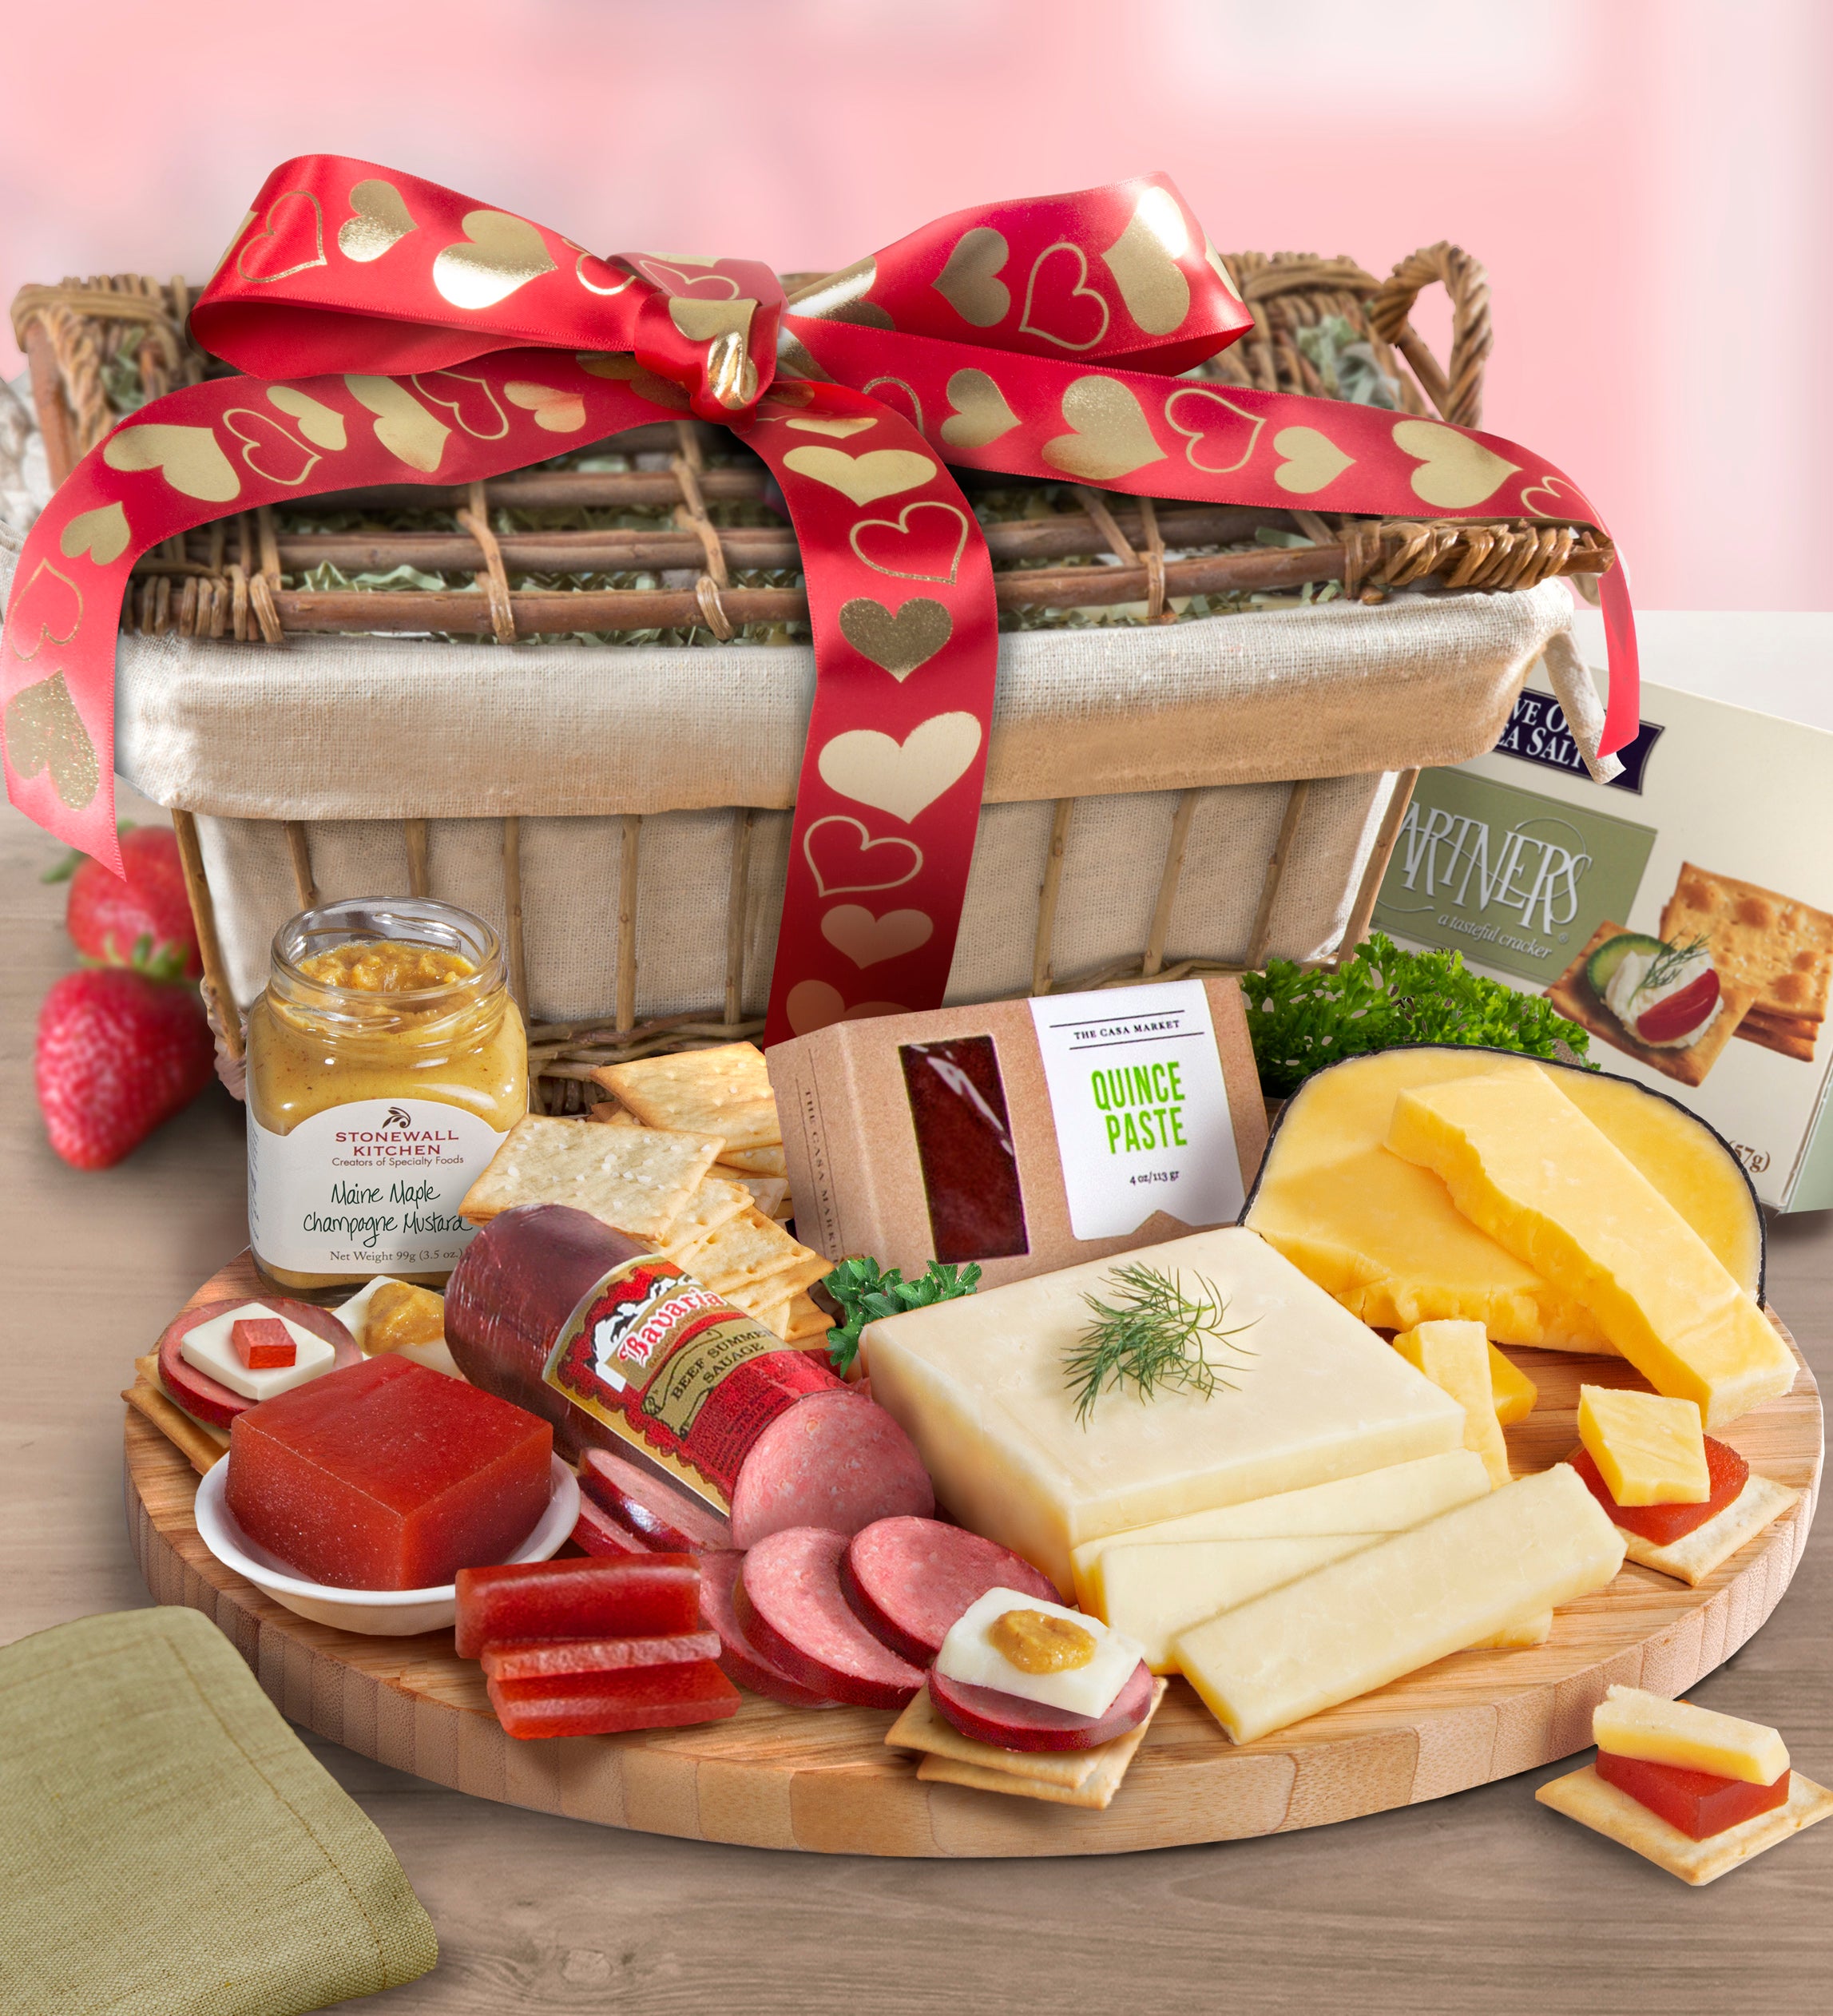 Ultimate Meat & Cheese Sampler Gift Basket